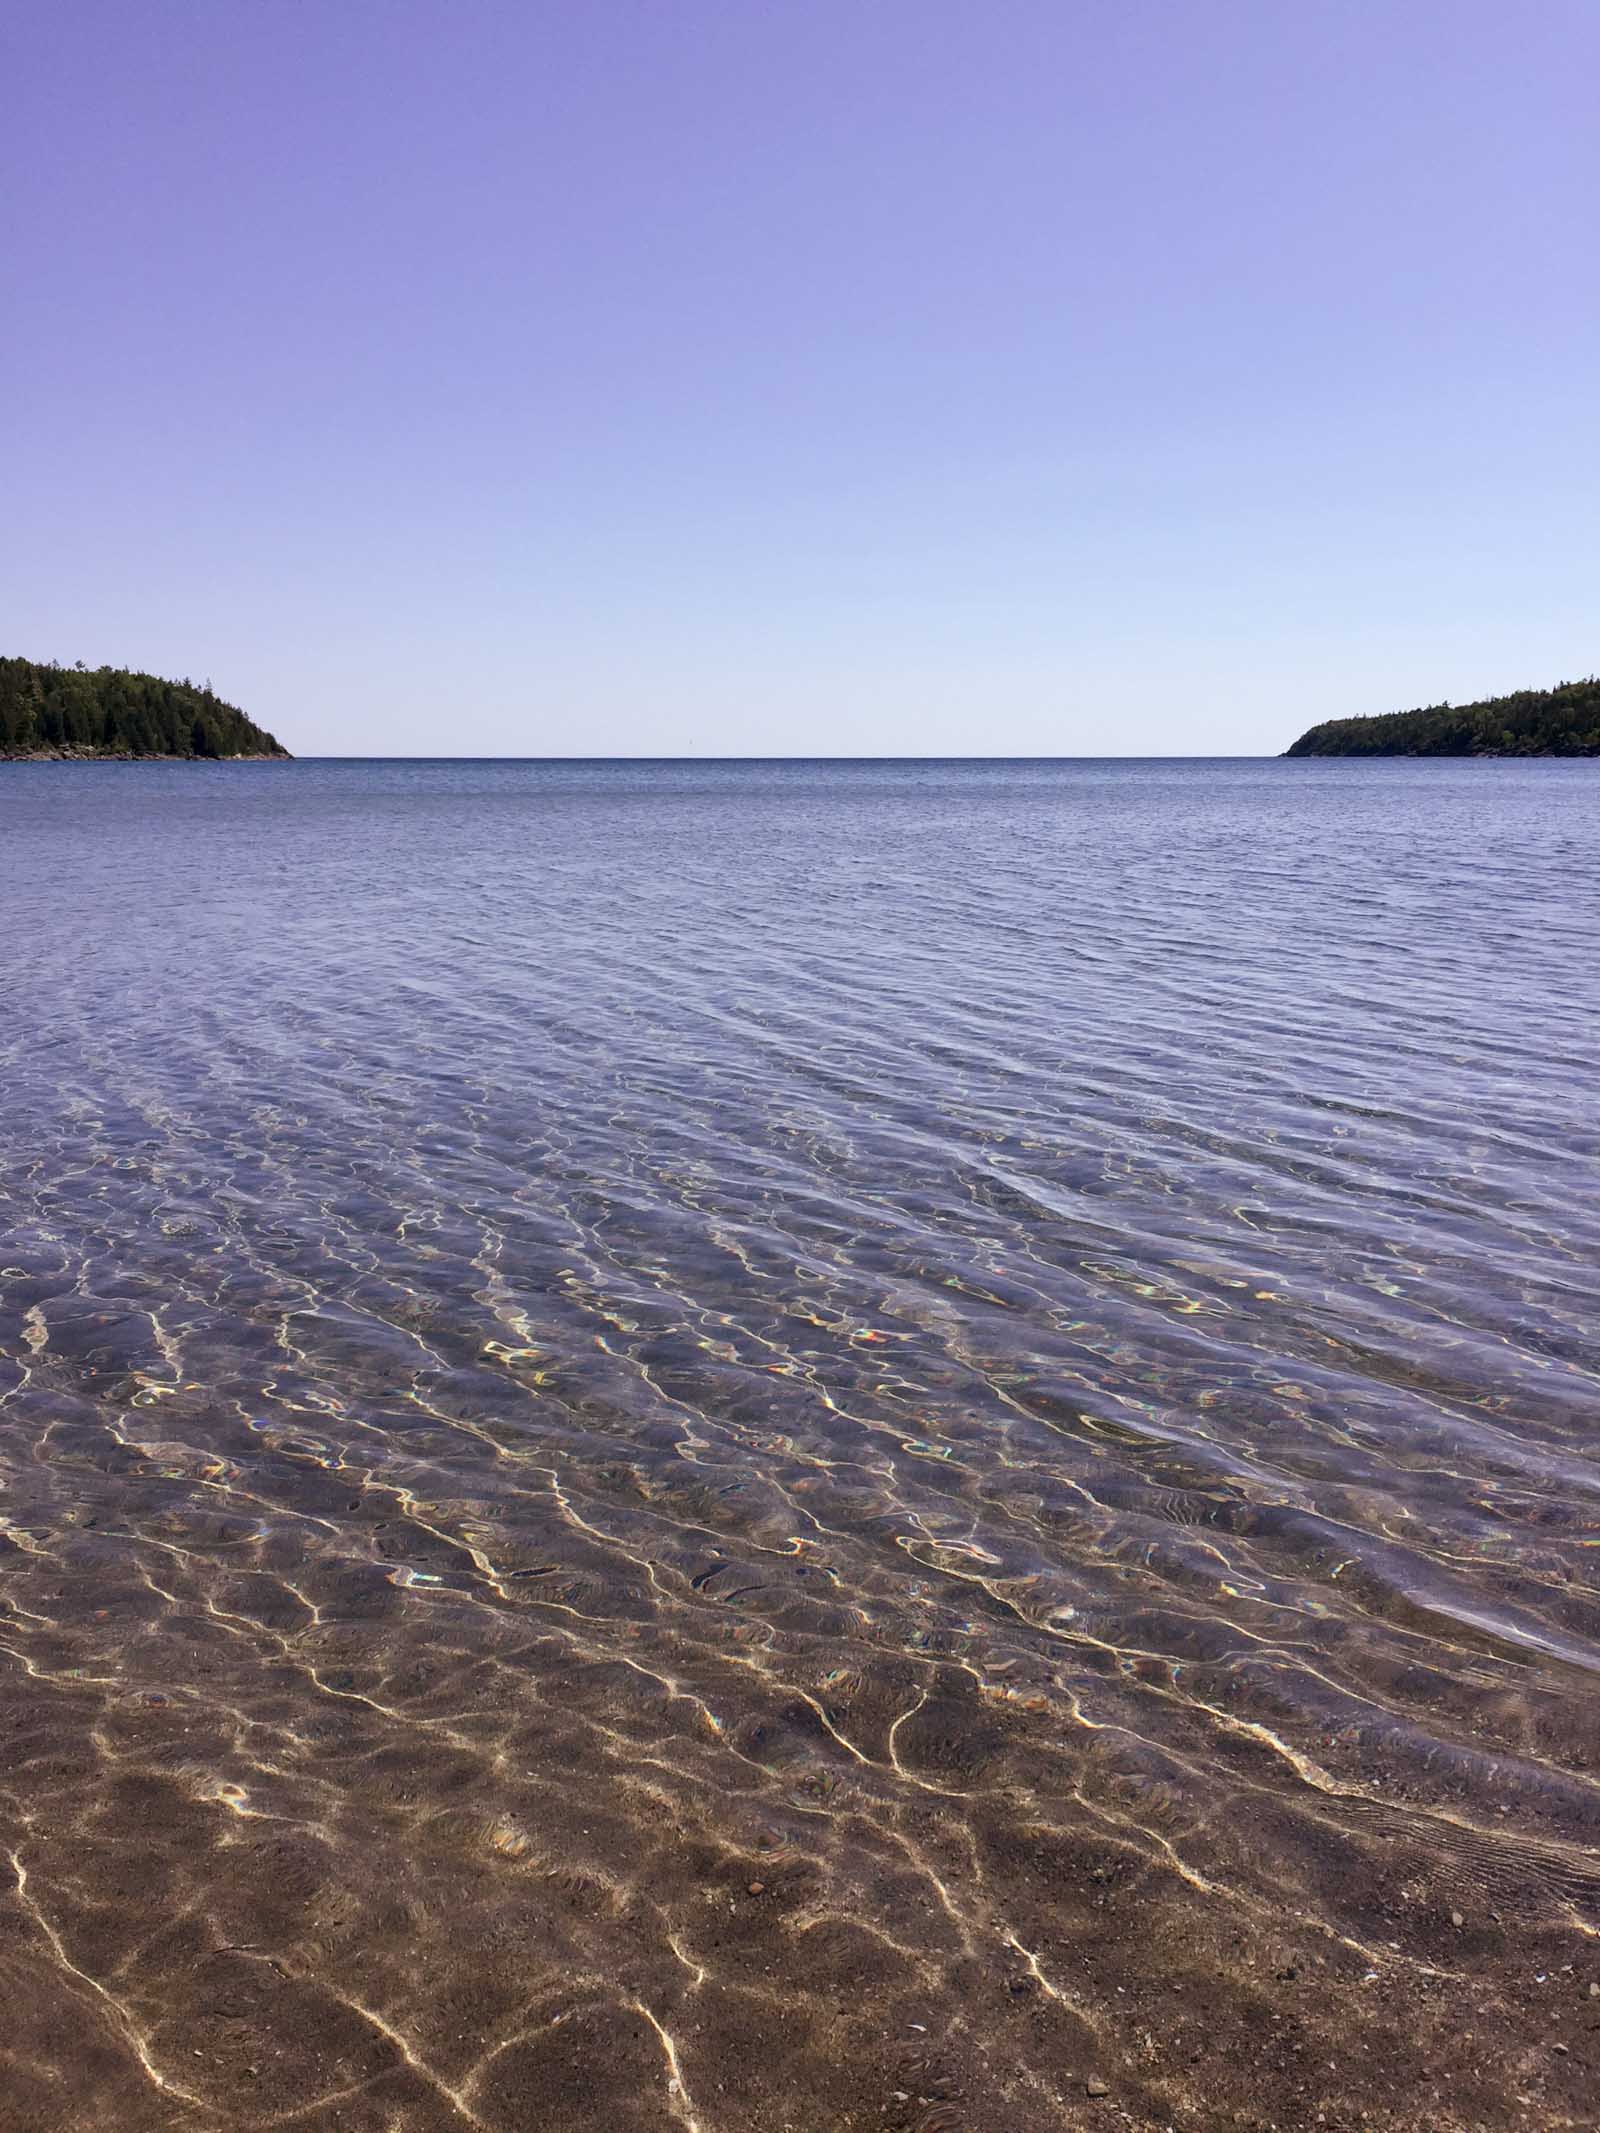 reasons to visit the great lakes, clear fresh waters